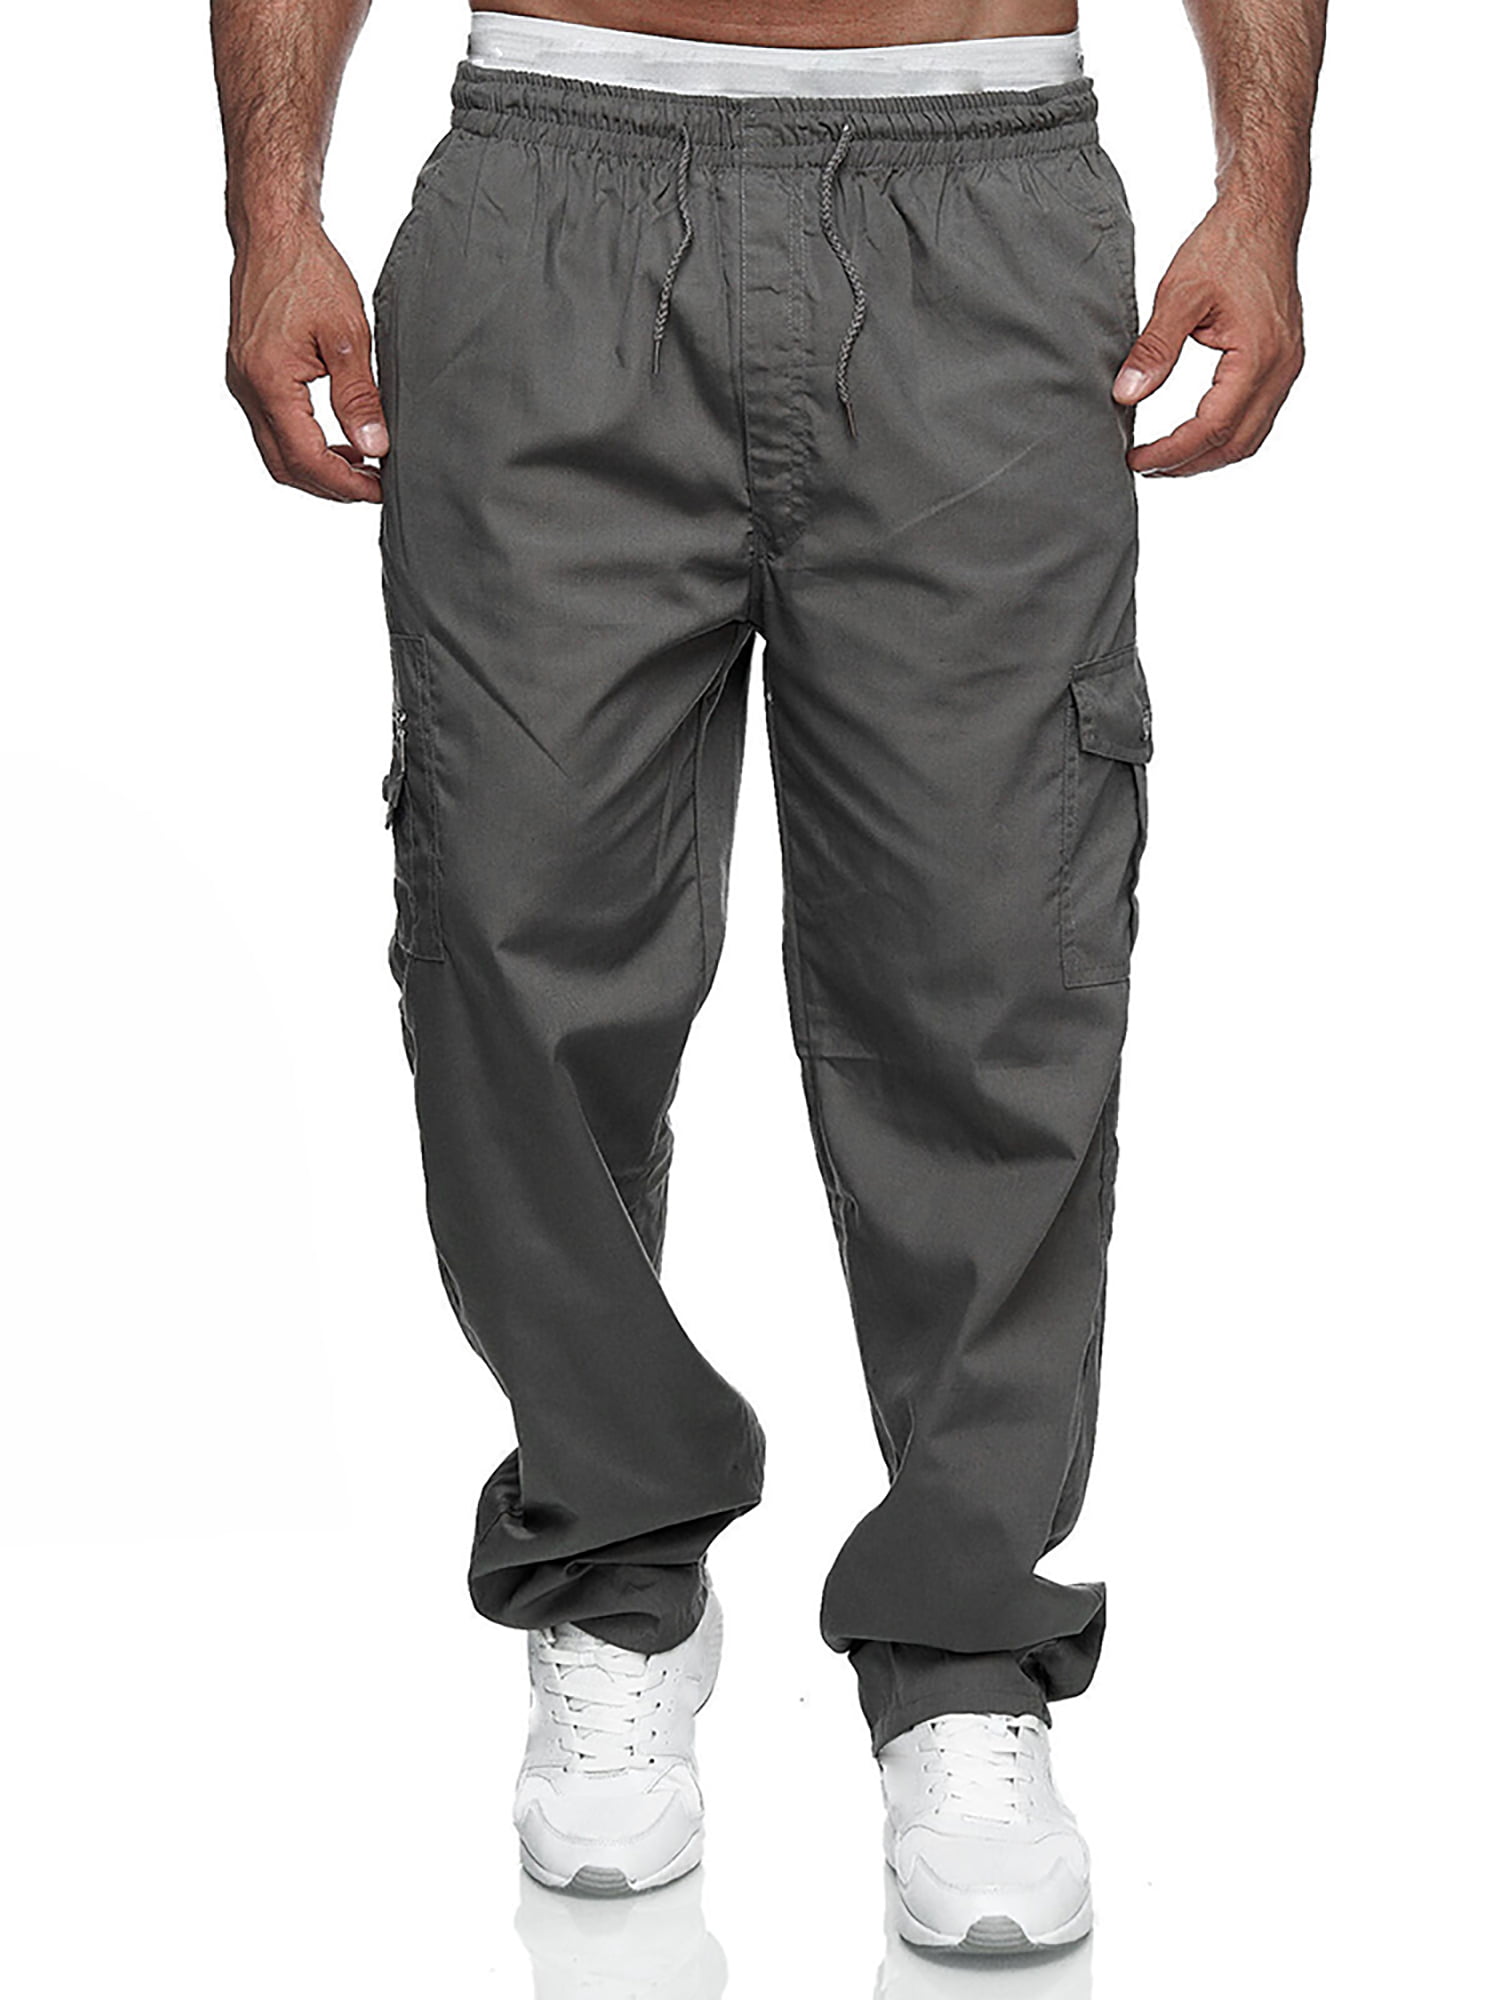 ORQ Men's Casual Multi Pockets Loose Straight Outdoor Cargo Pants